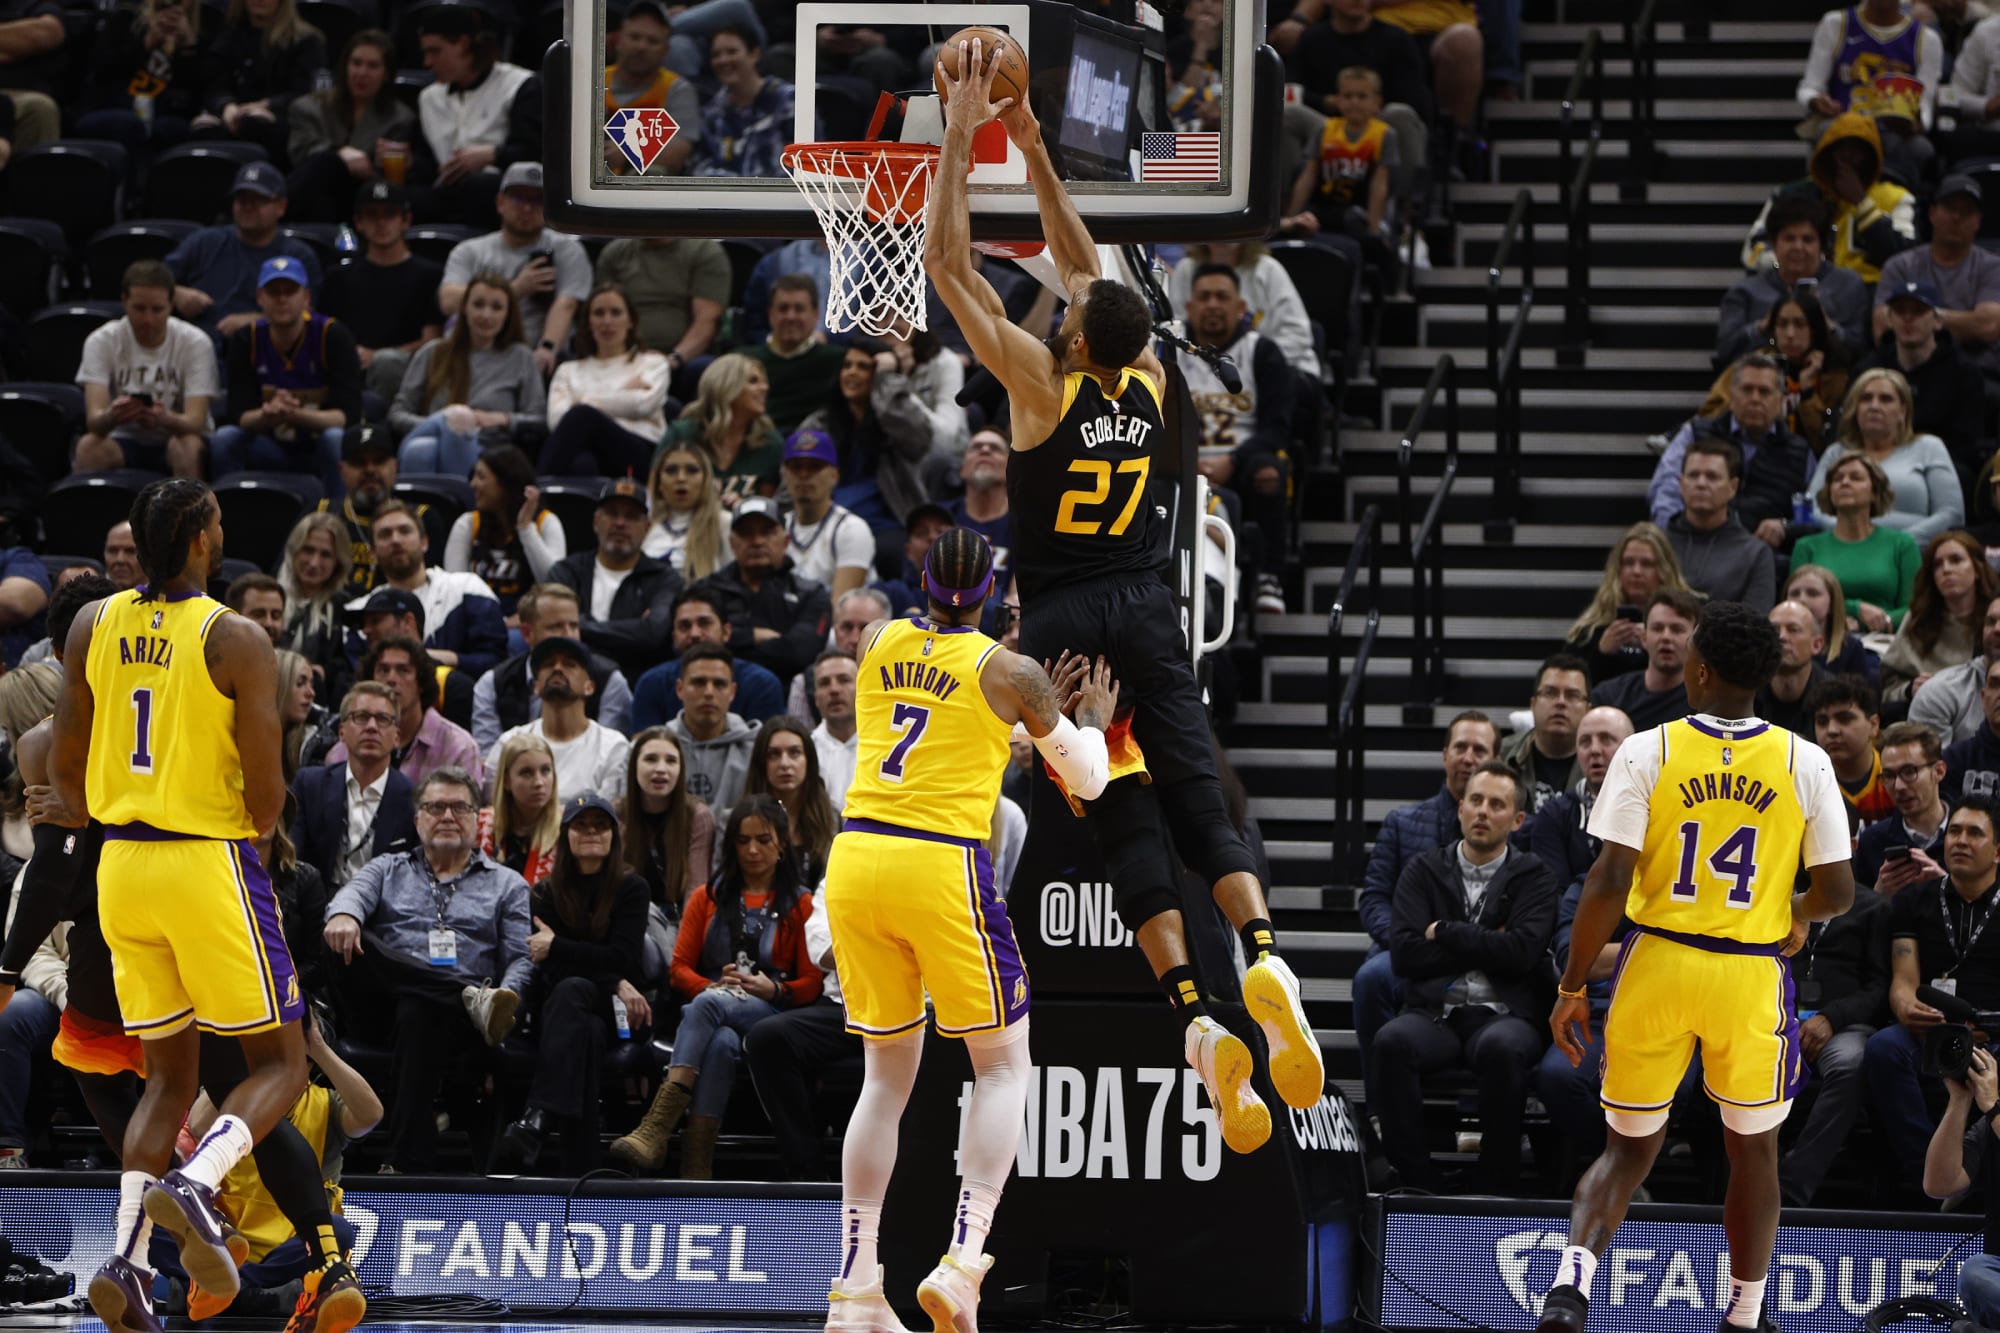 The Los Angeles Lakers were knocked out of the playoffs (again) by the Jazz